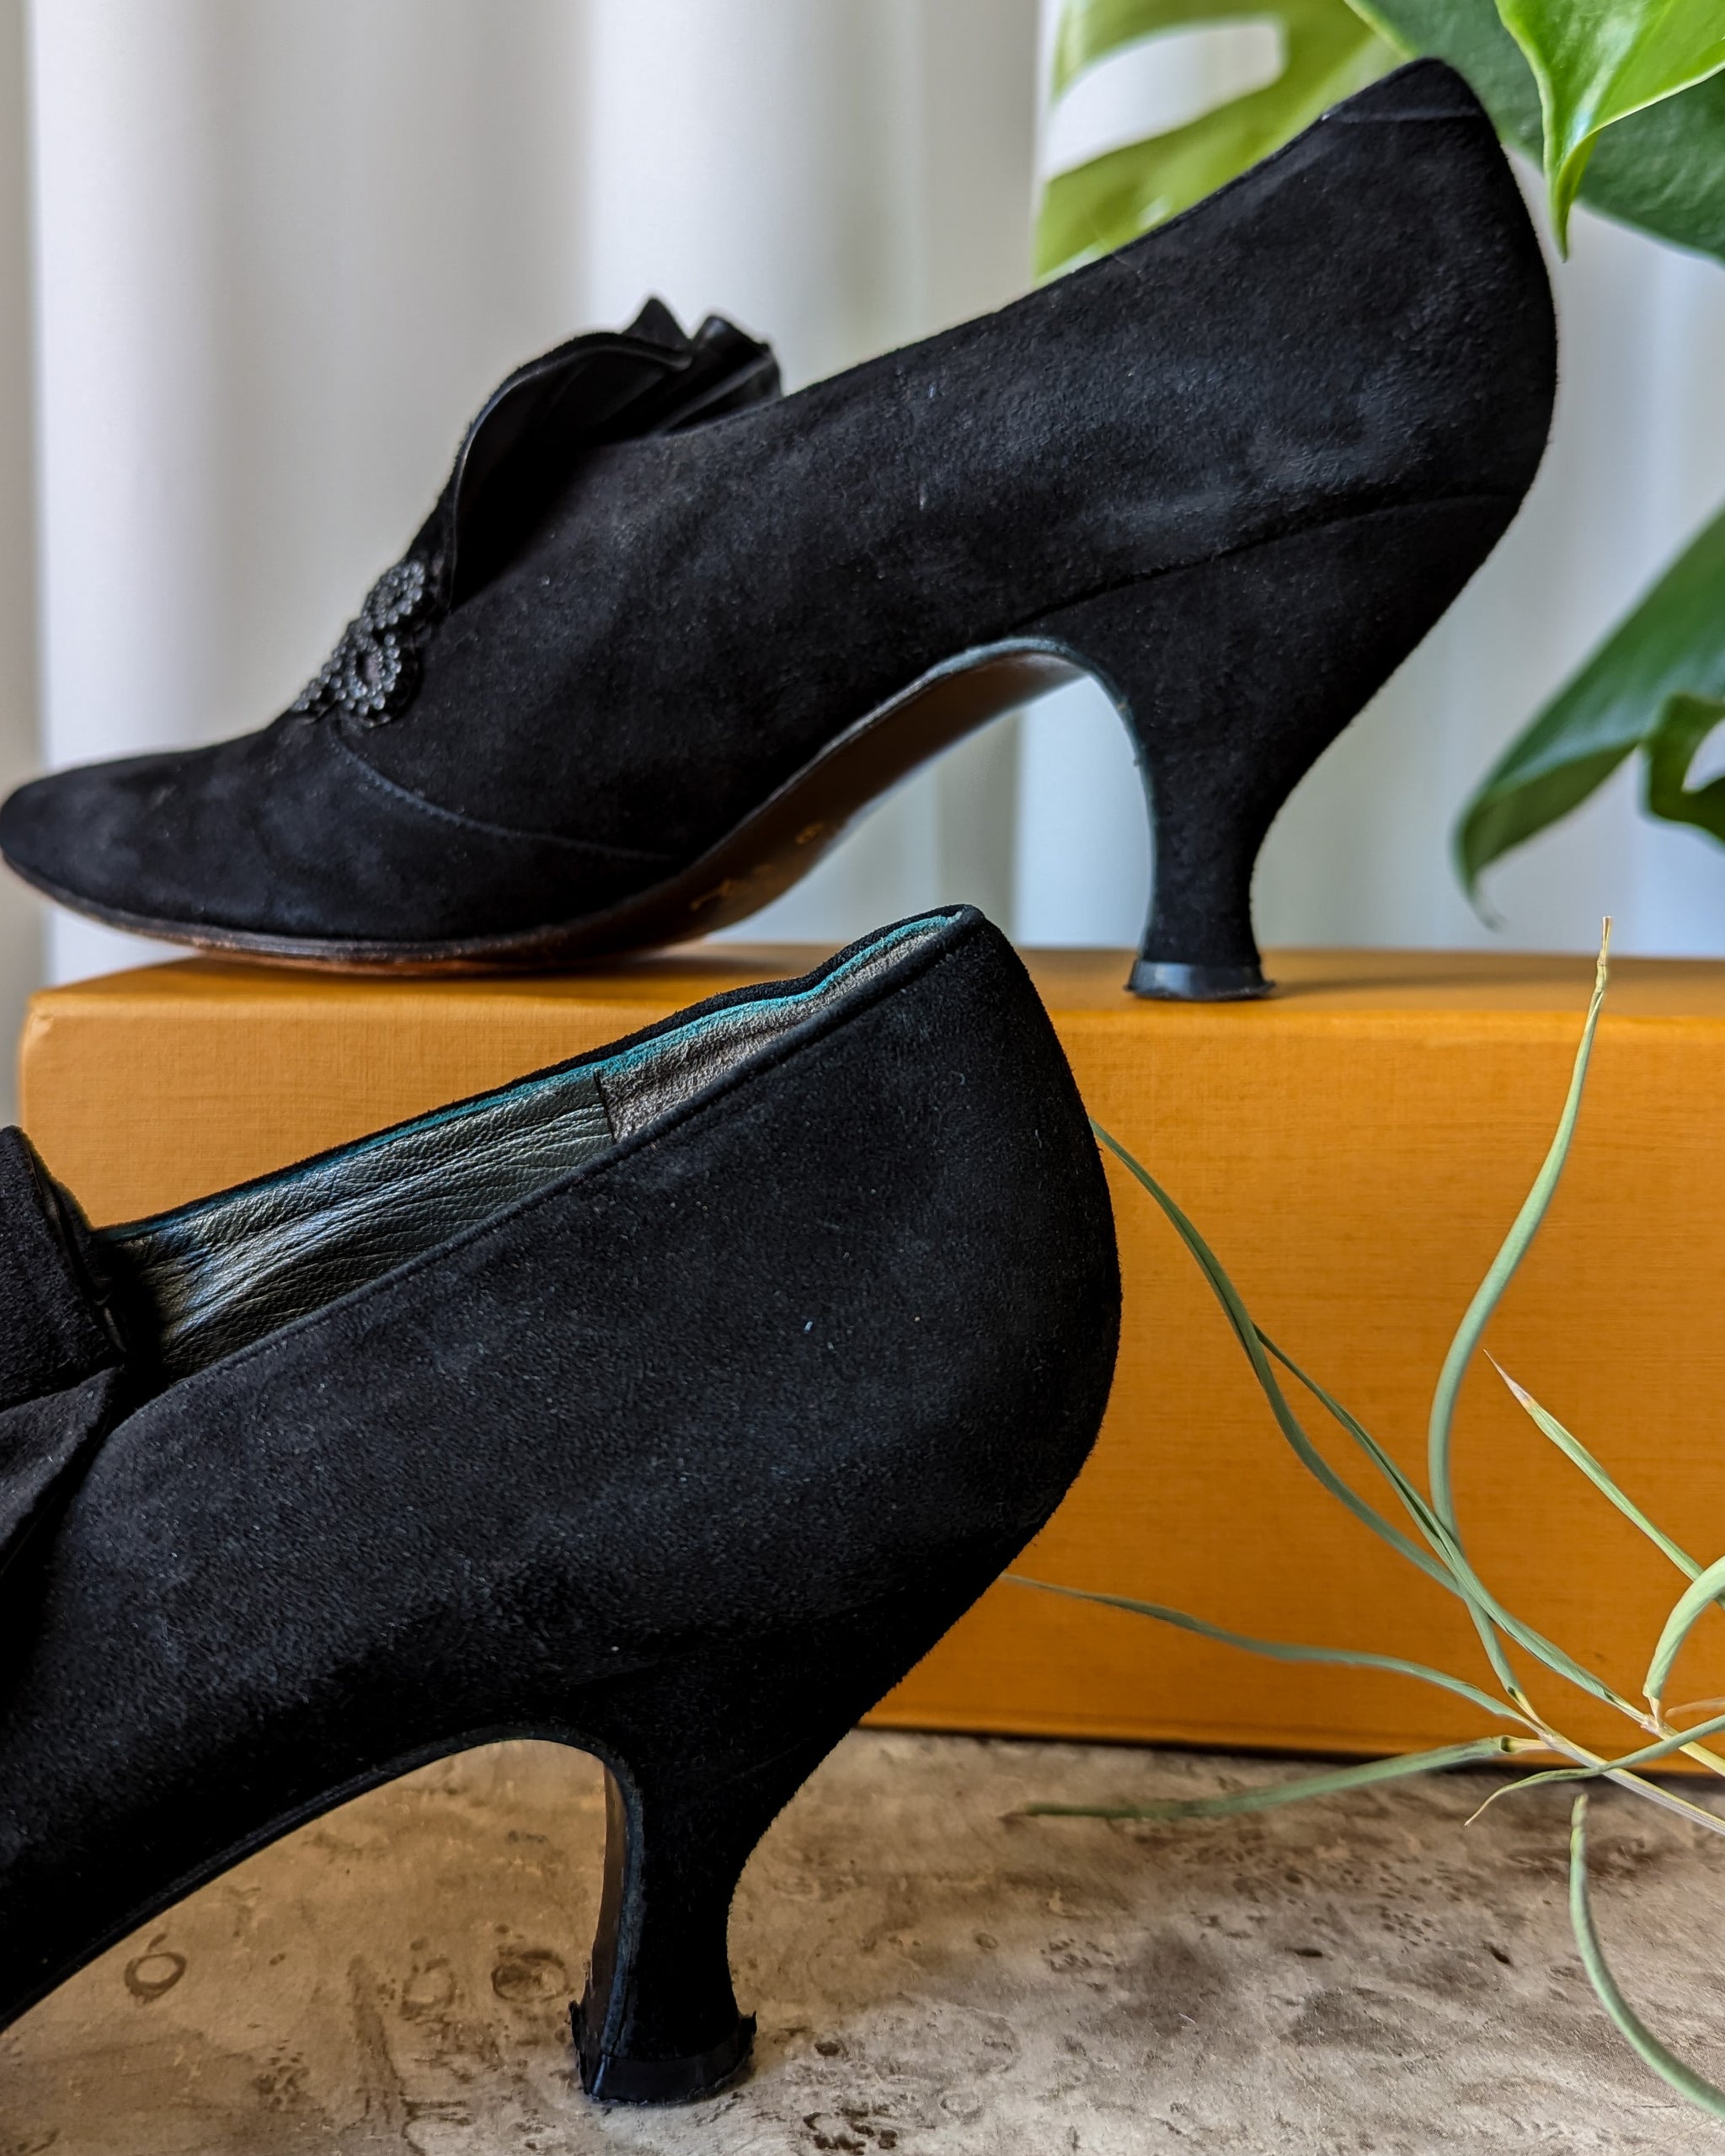 Peter Fox Shoes: What is a Louis heel?